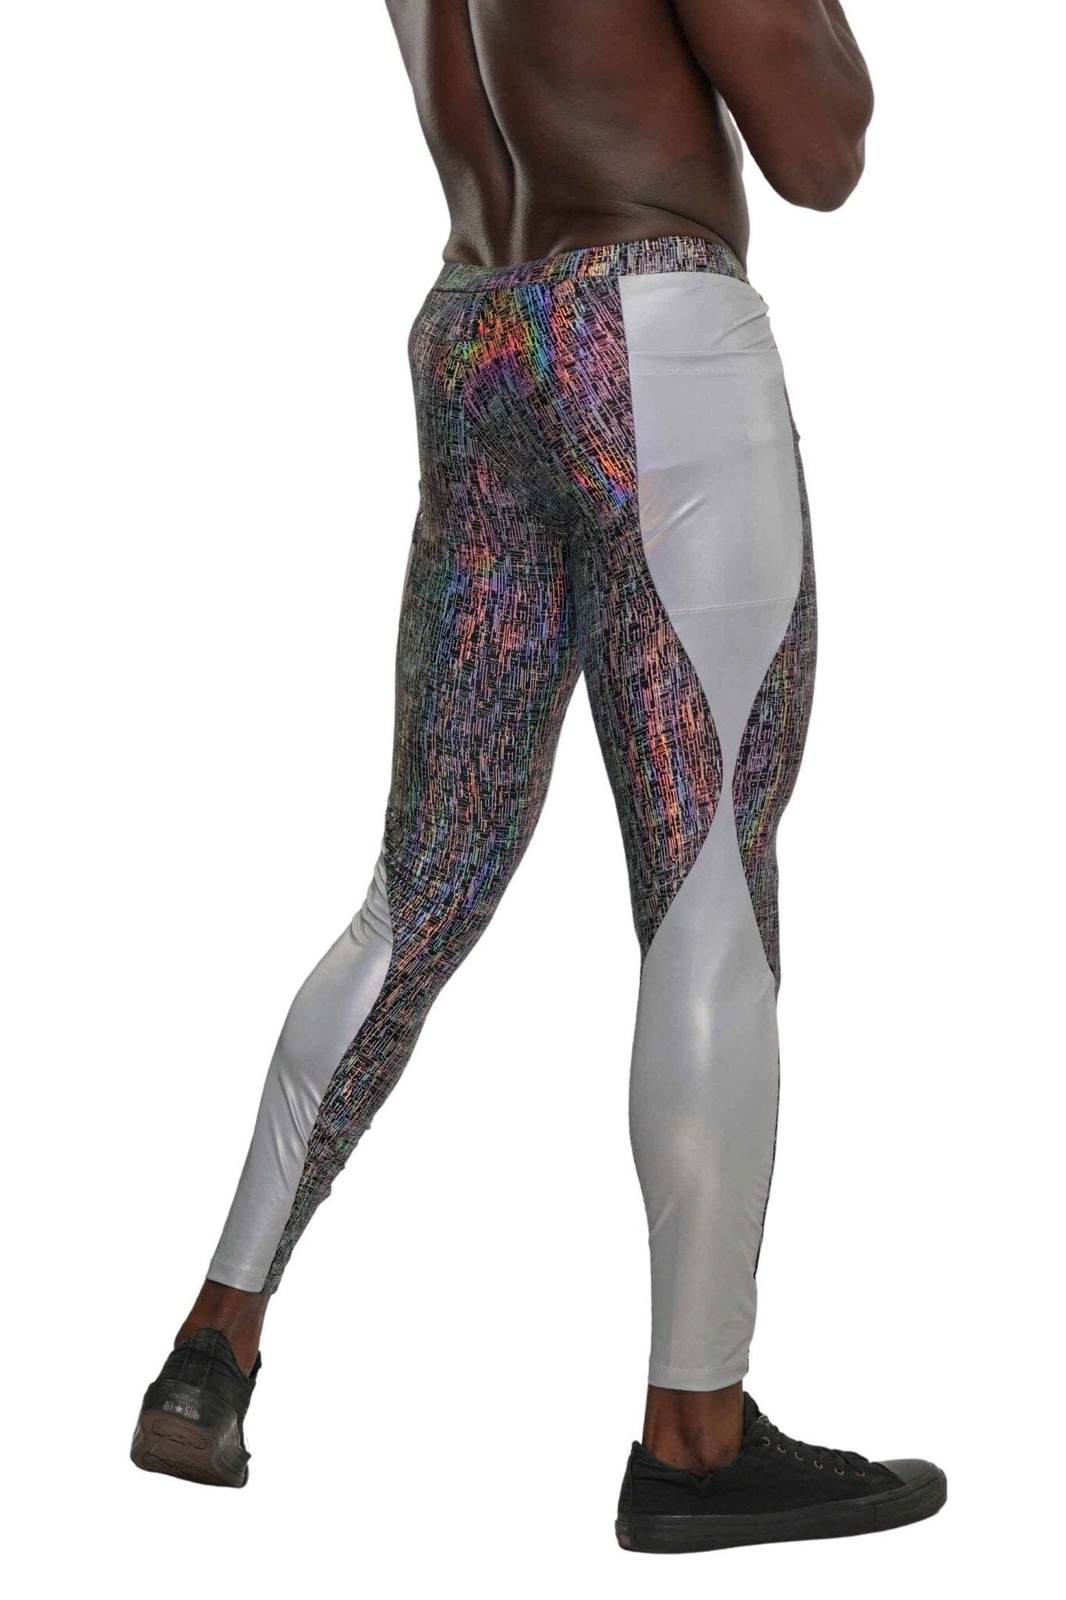 Mens Holographic Silver meggings from Love Khaos